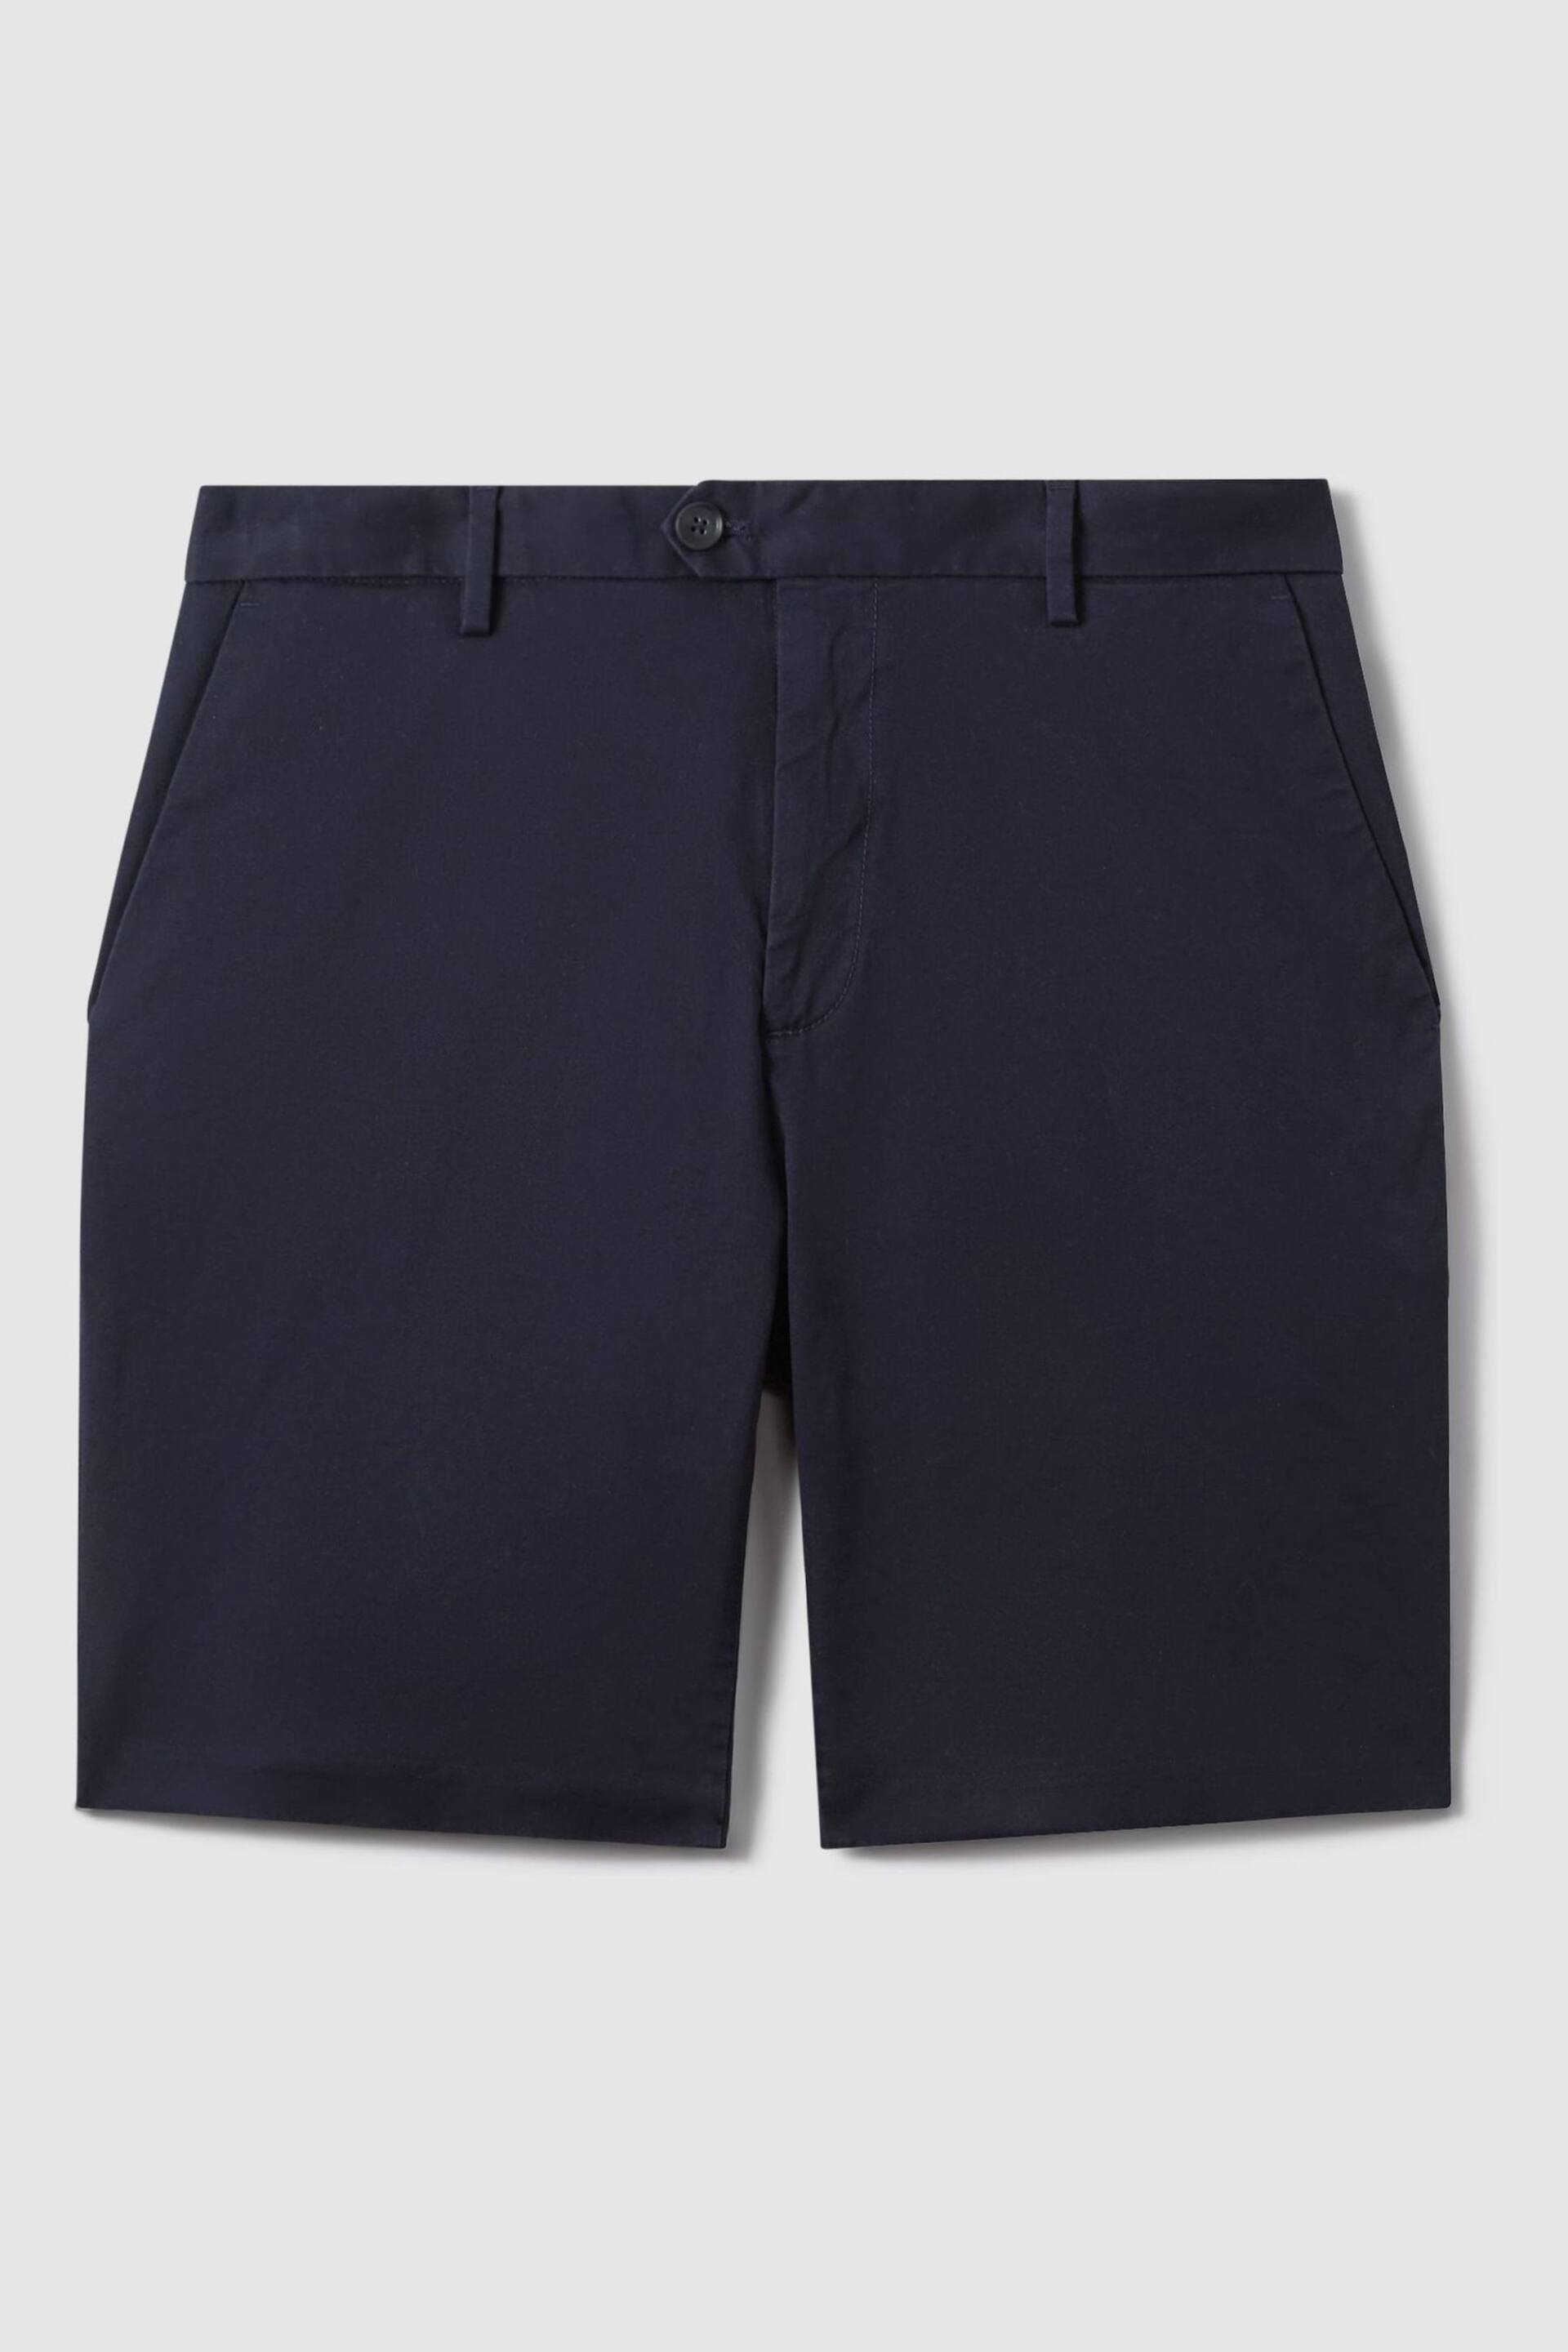 Reiss Navy Wicket Modern Fit Cotton Blend Chino Shorts - Image 2 of 6